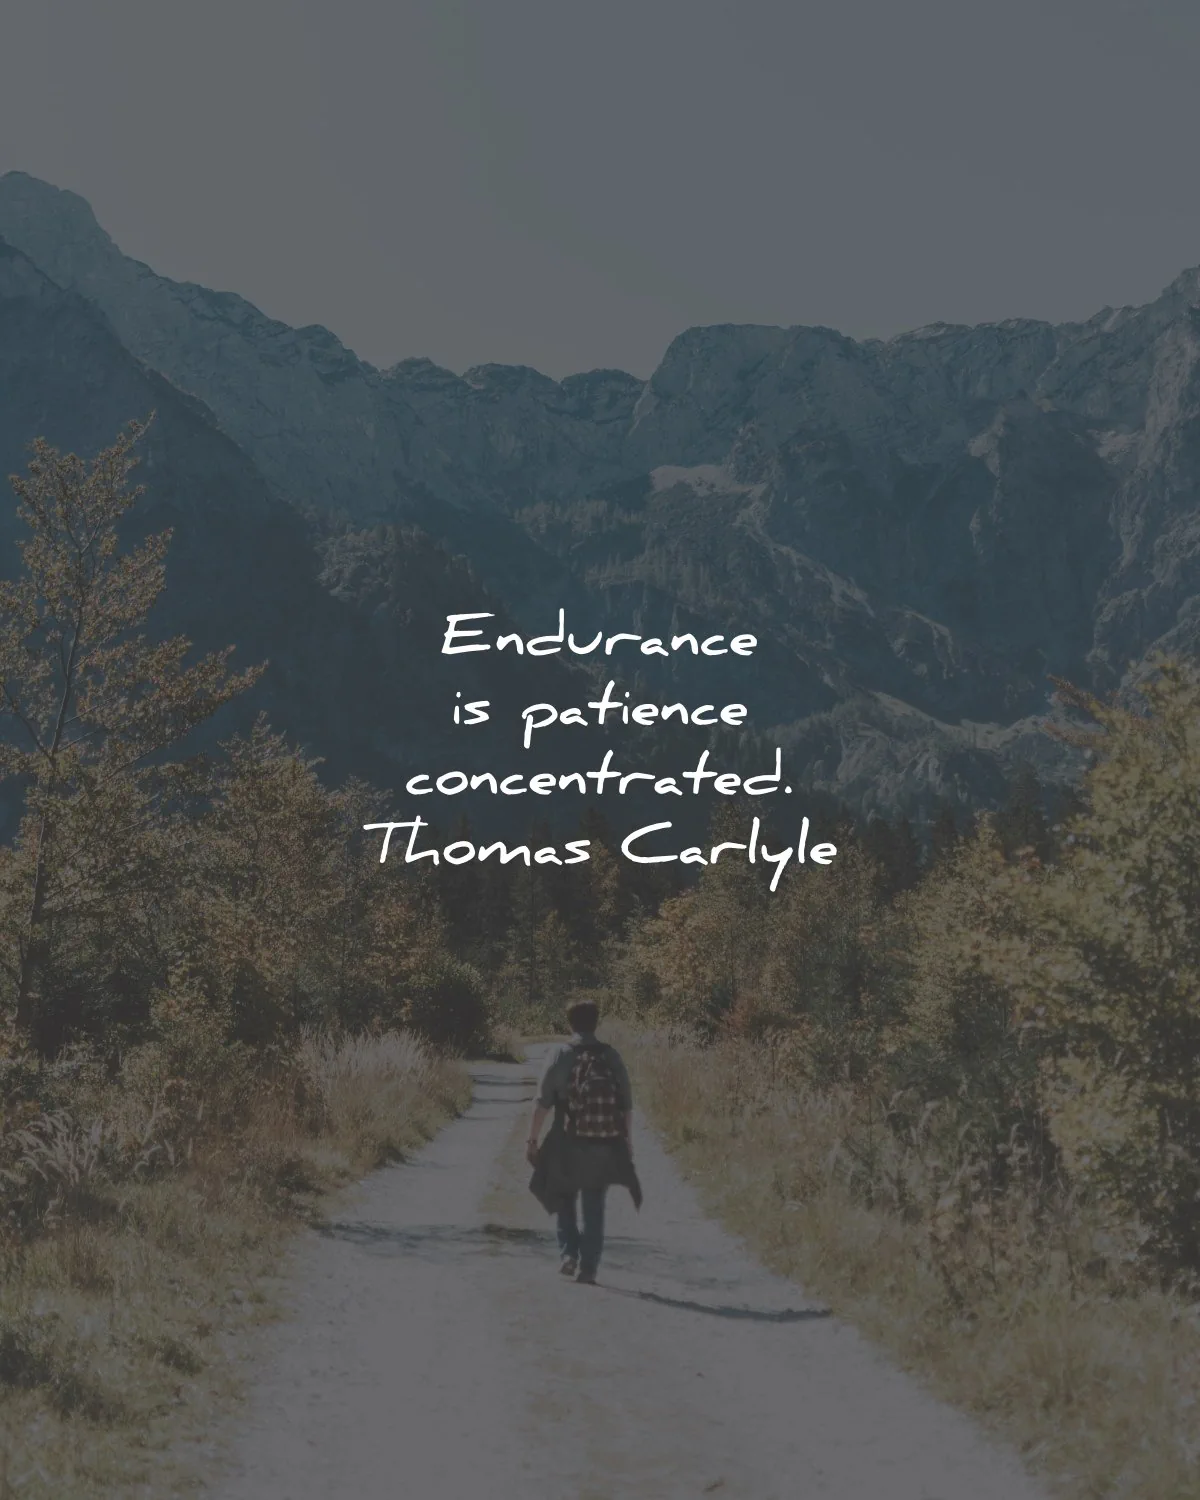 waiting quotes endurance patience concentrated thomas carlyle wisdom